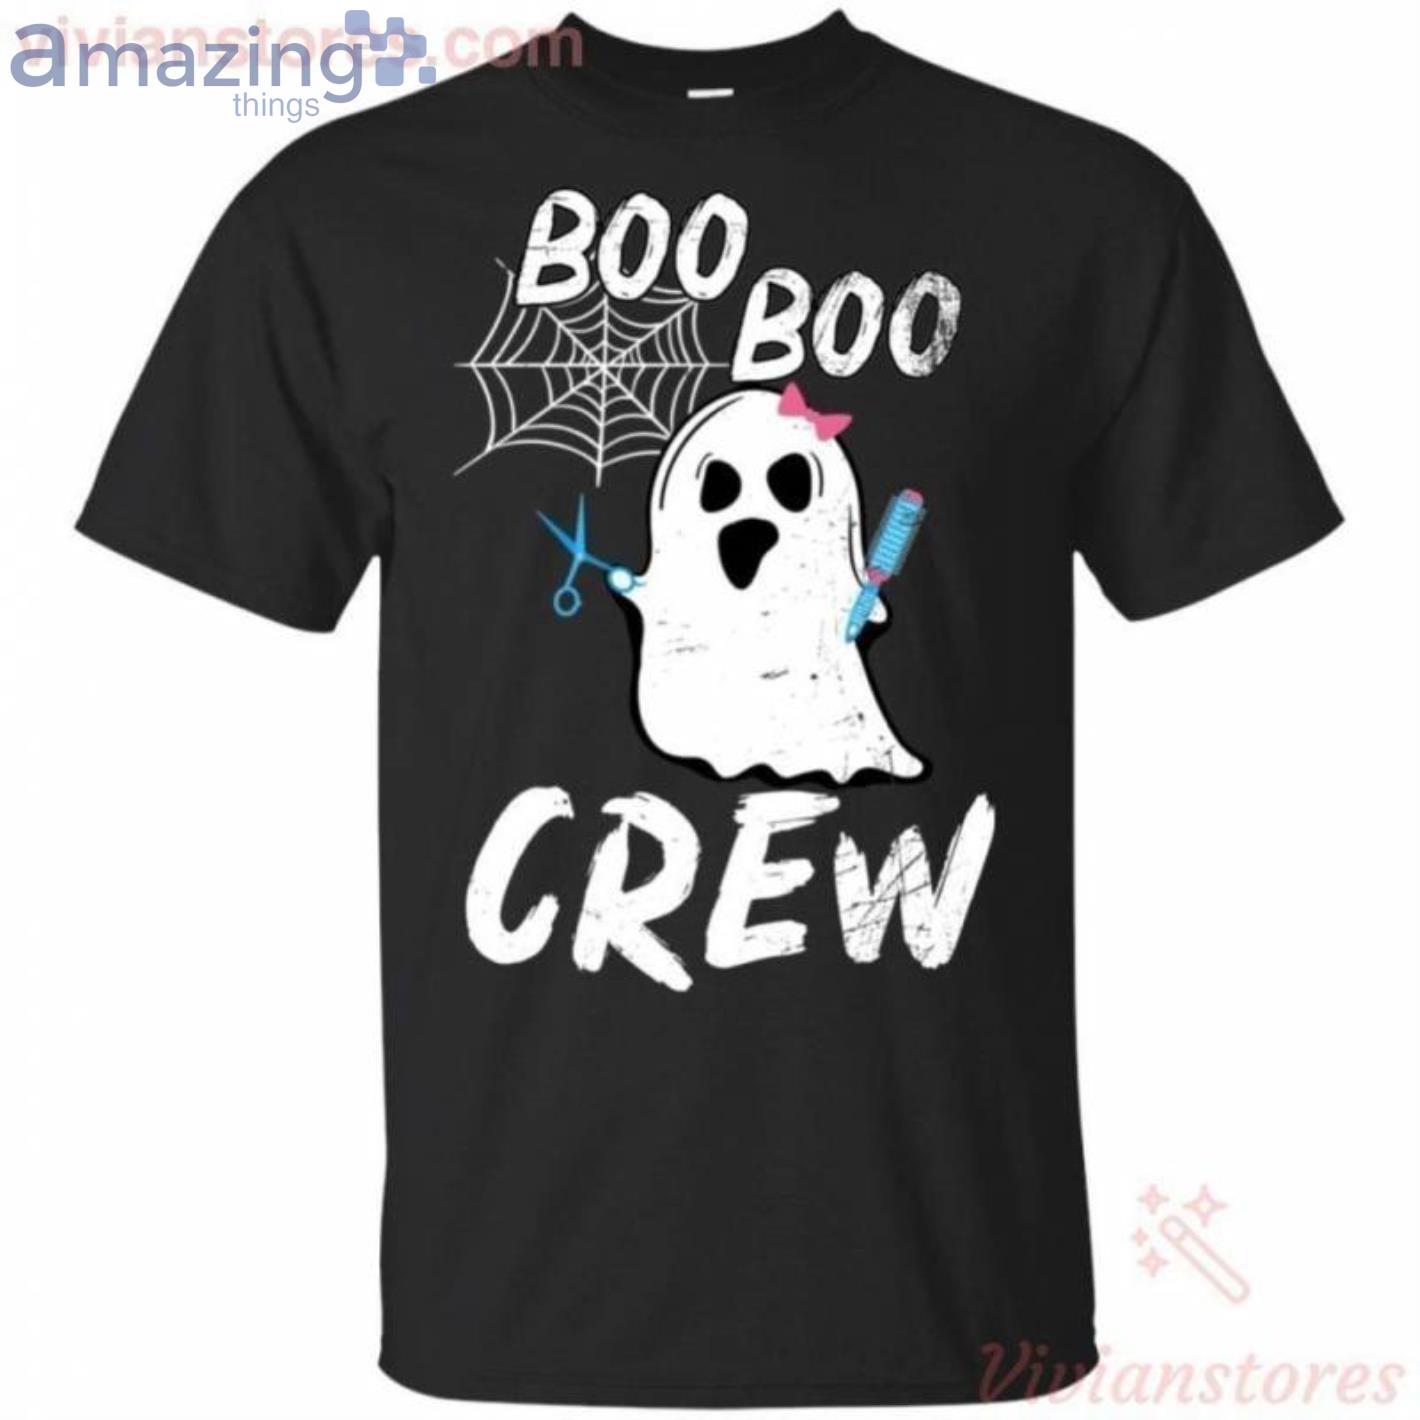 Hairdresser Ghost Boo Boo Crew Halloween T-Shirt Product Photo 1